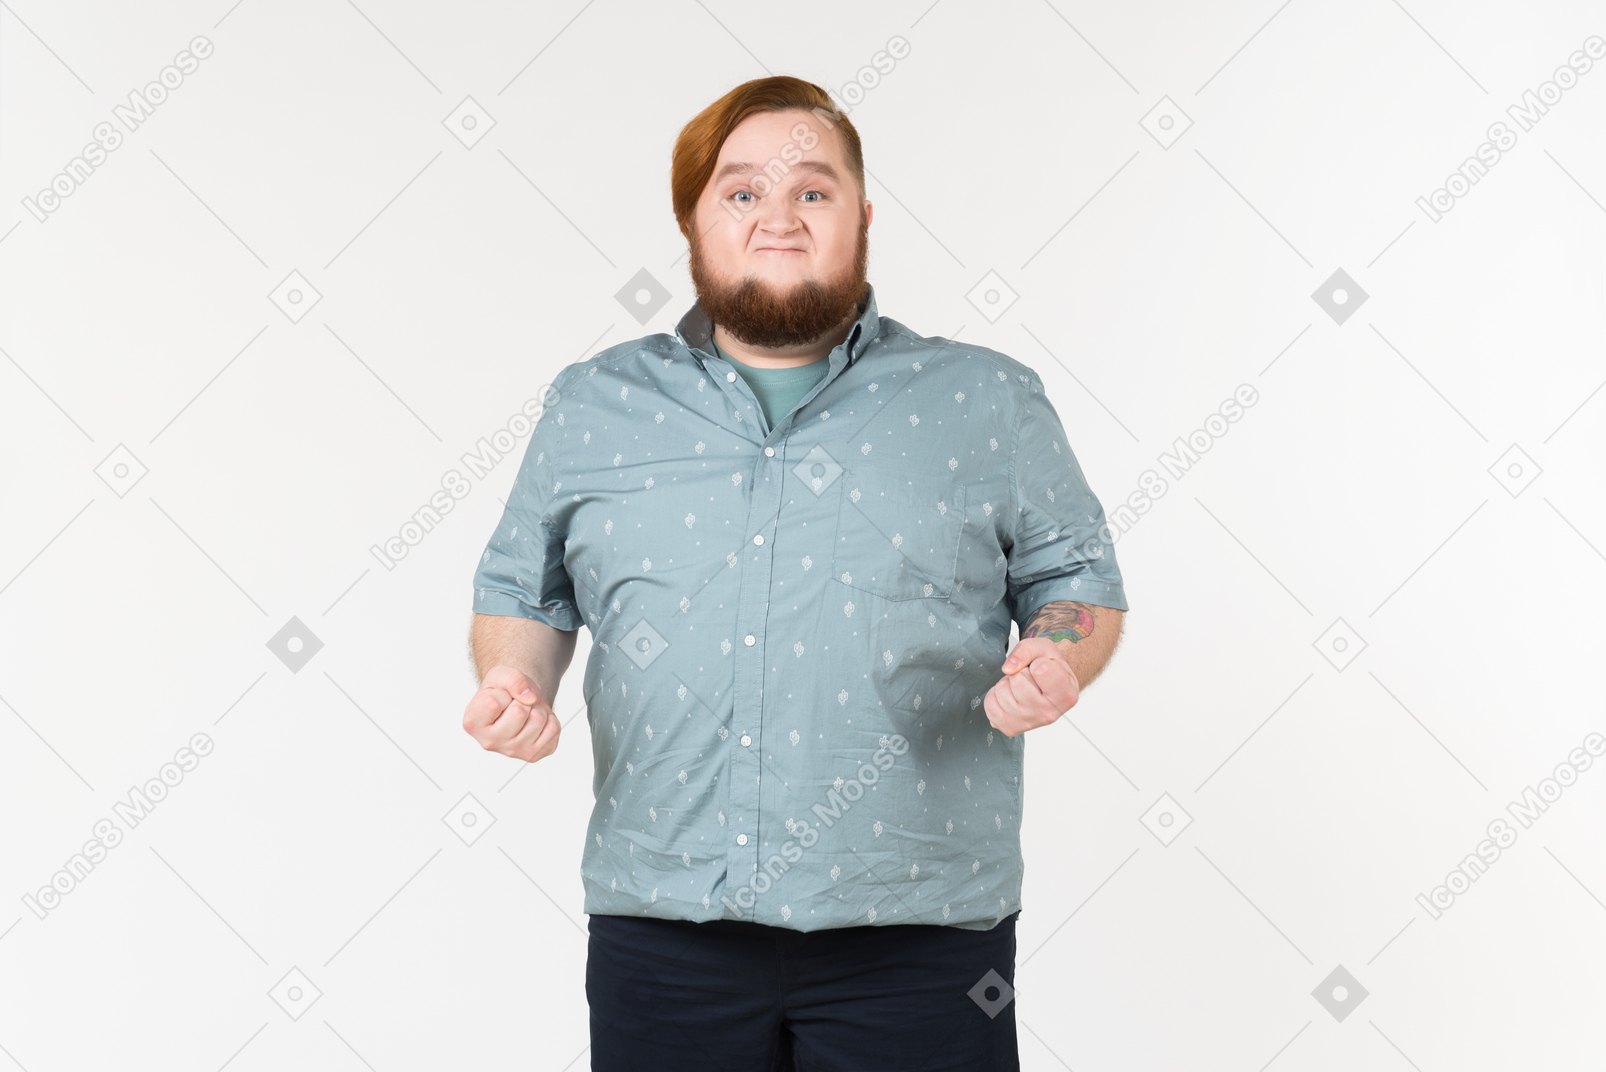 A fat man with his fists clenched simmering with anger